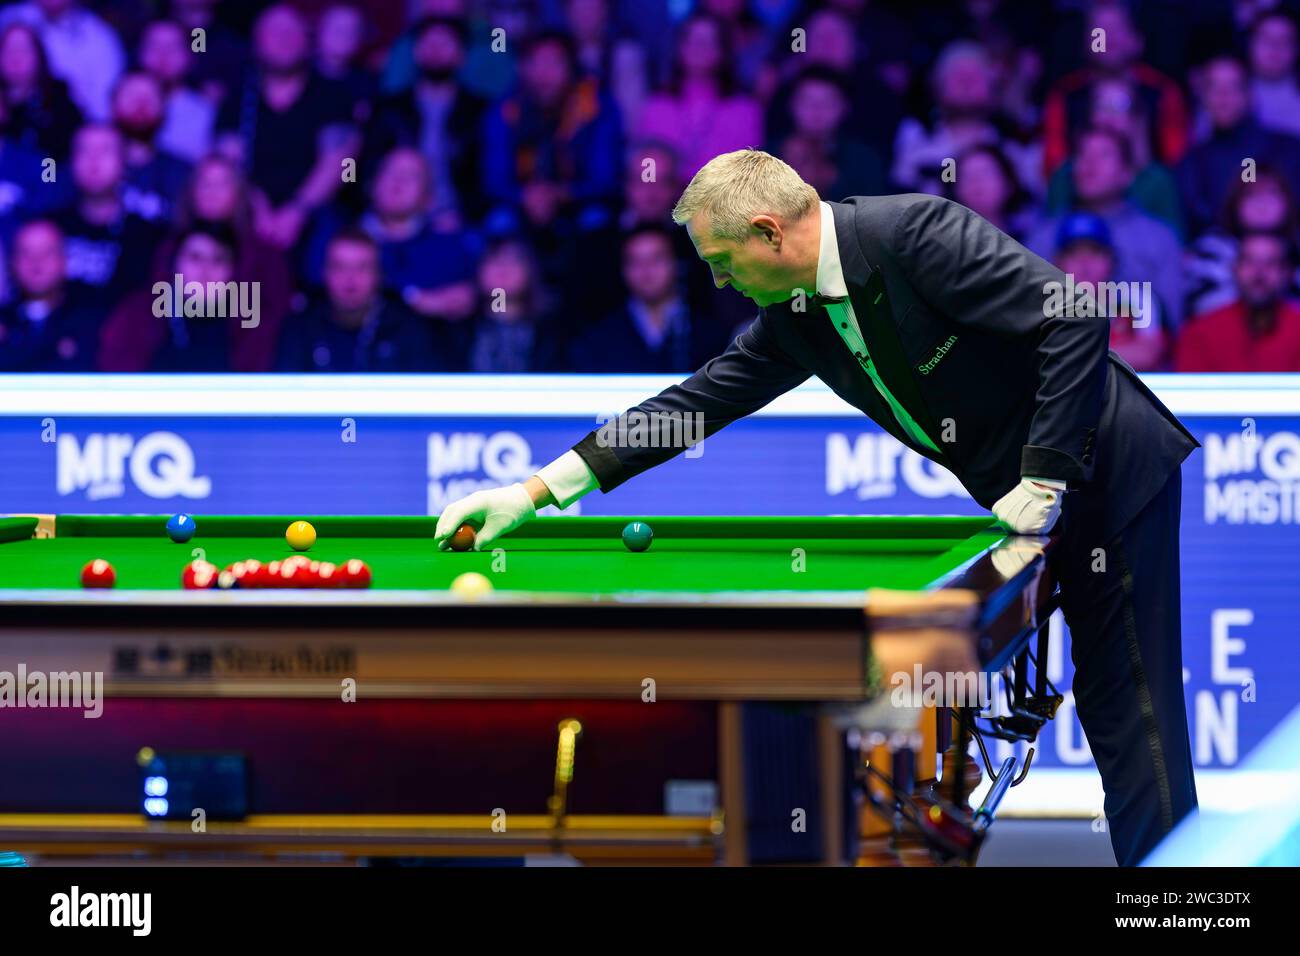 LONDON, UNITED KINGDOM. 13th Jan, 2024. Referee Robert Spencer tries to fix the ball on the table during Ali Carter and Mark Allen in Semi Finals of the 2024 MrQ Masters at Alexandra Palace on Saturday, January 13, 2024 in LONDON ENGLAND. Credit: Taka G Wu/Alamy Live News Stock Photo